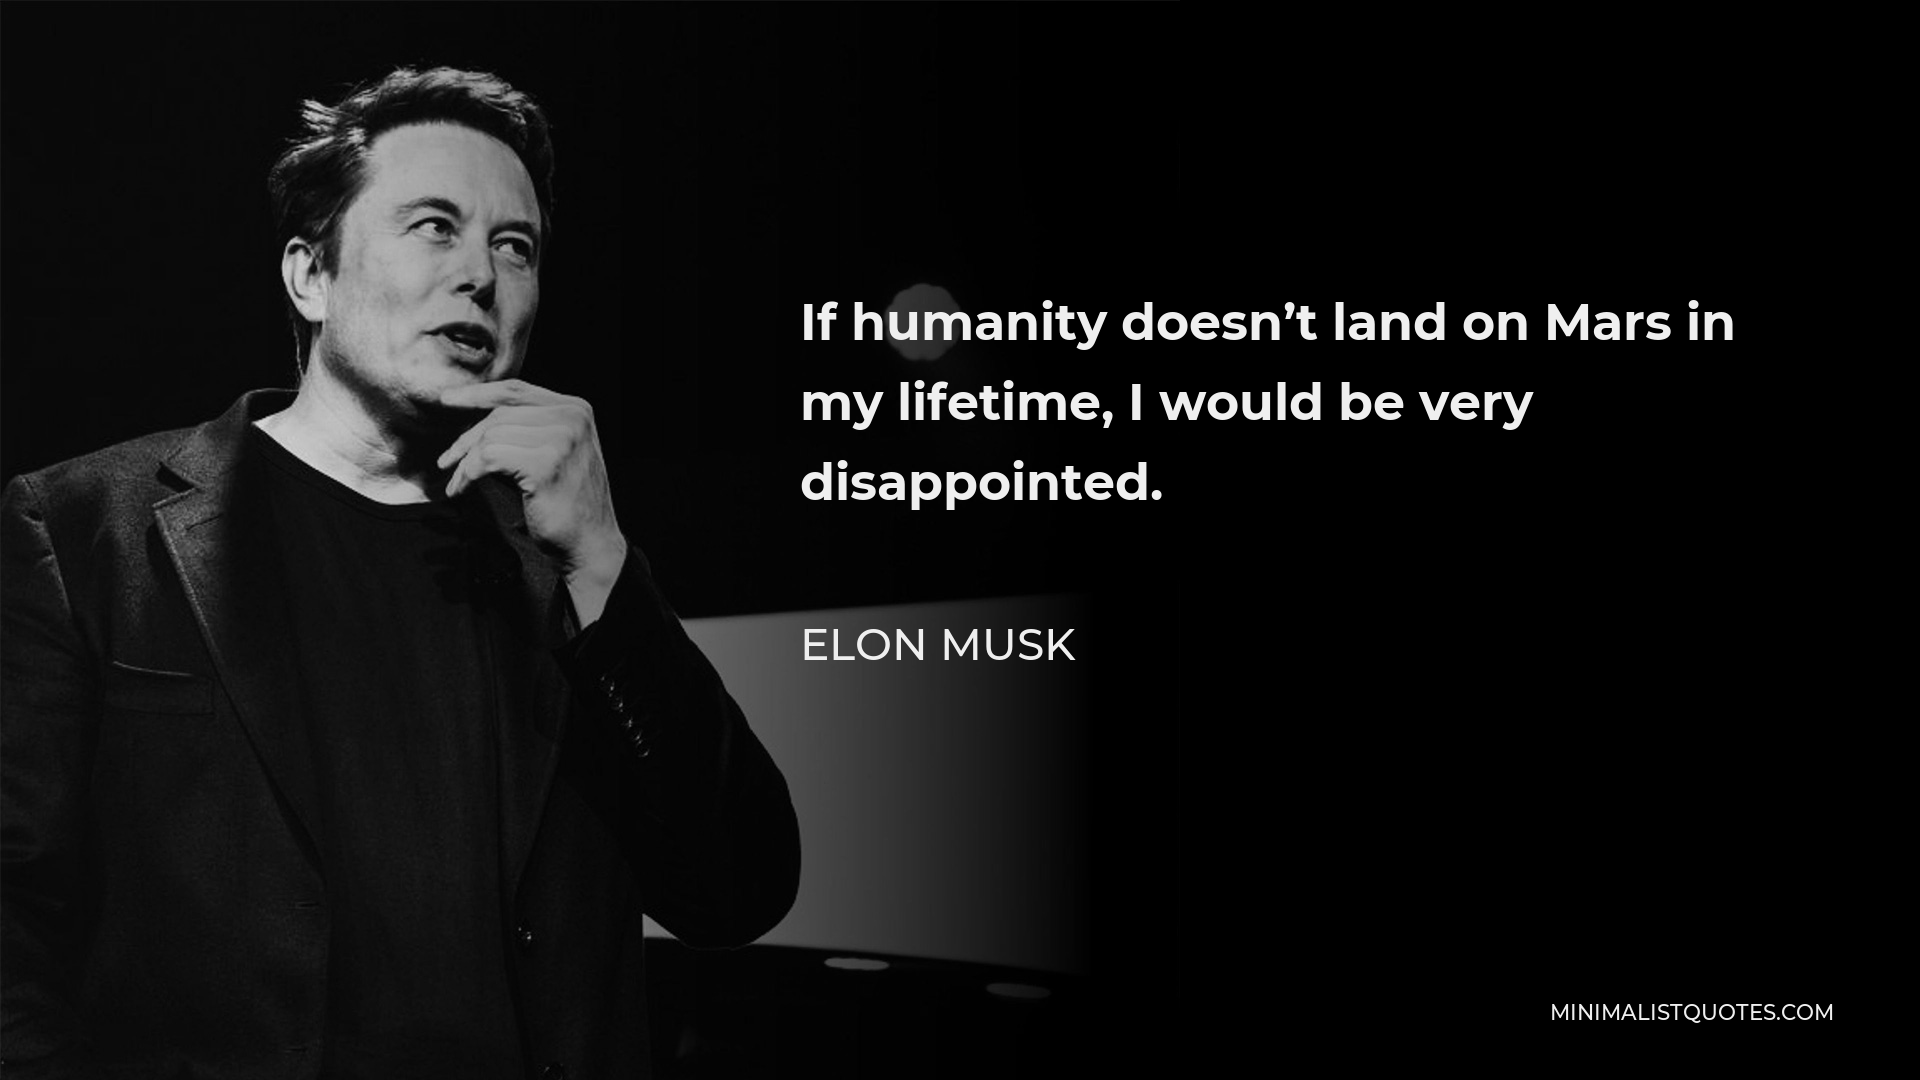 Elon Musk Quote - If humanity doesn’t land on Mars in my lifetime, I would be very disappointed.